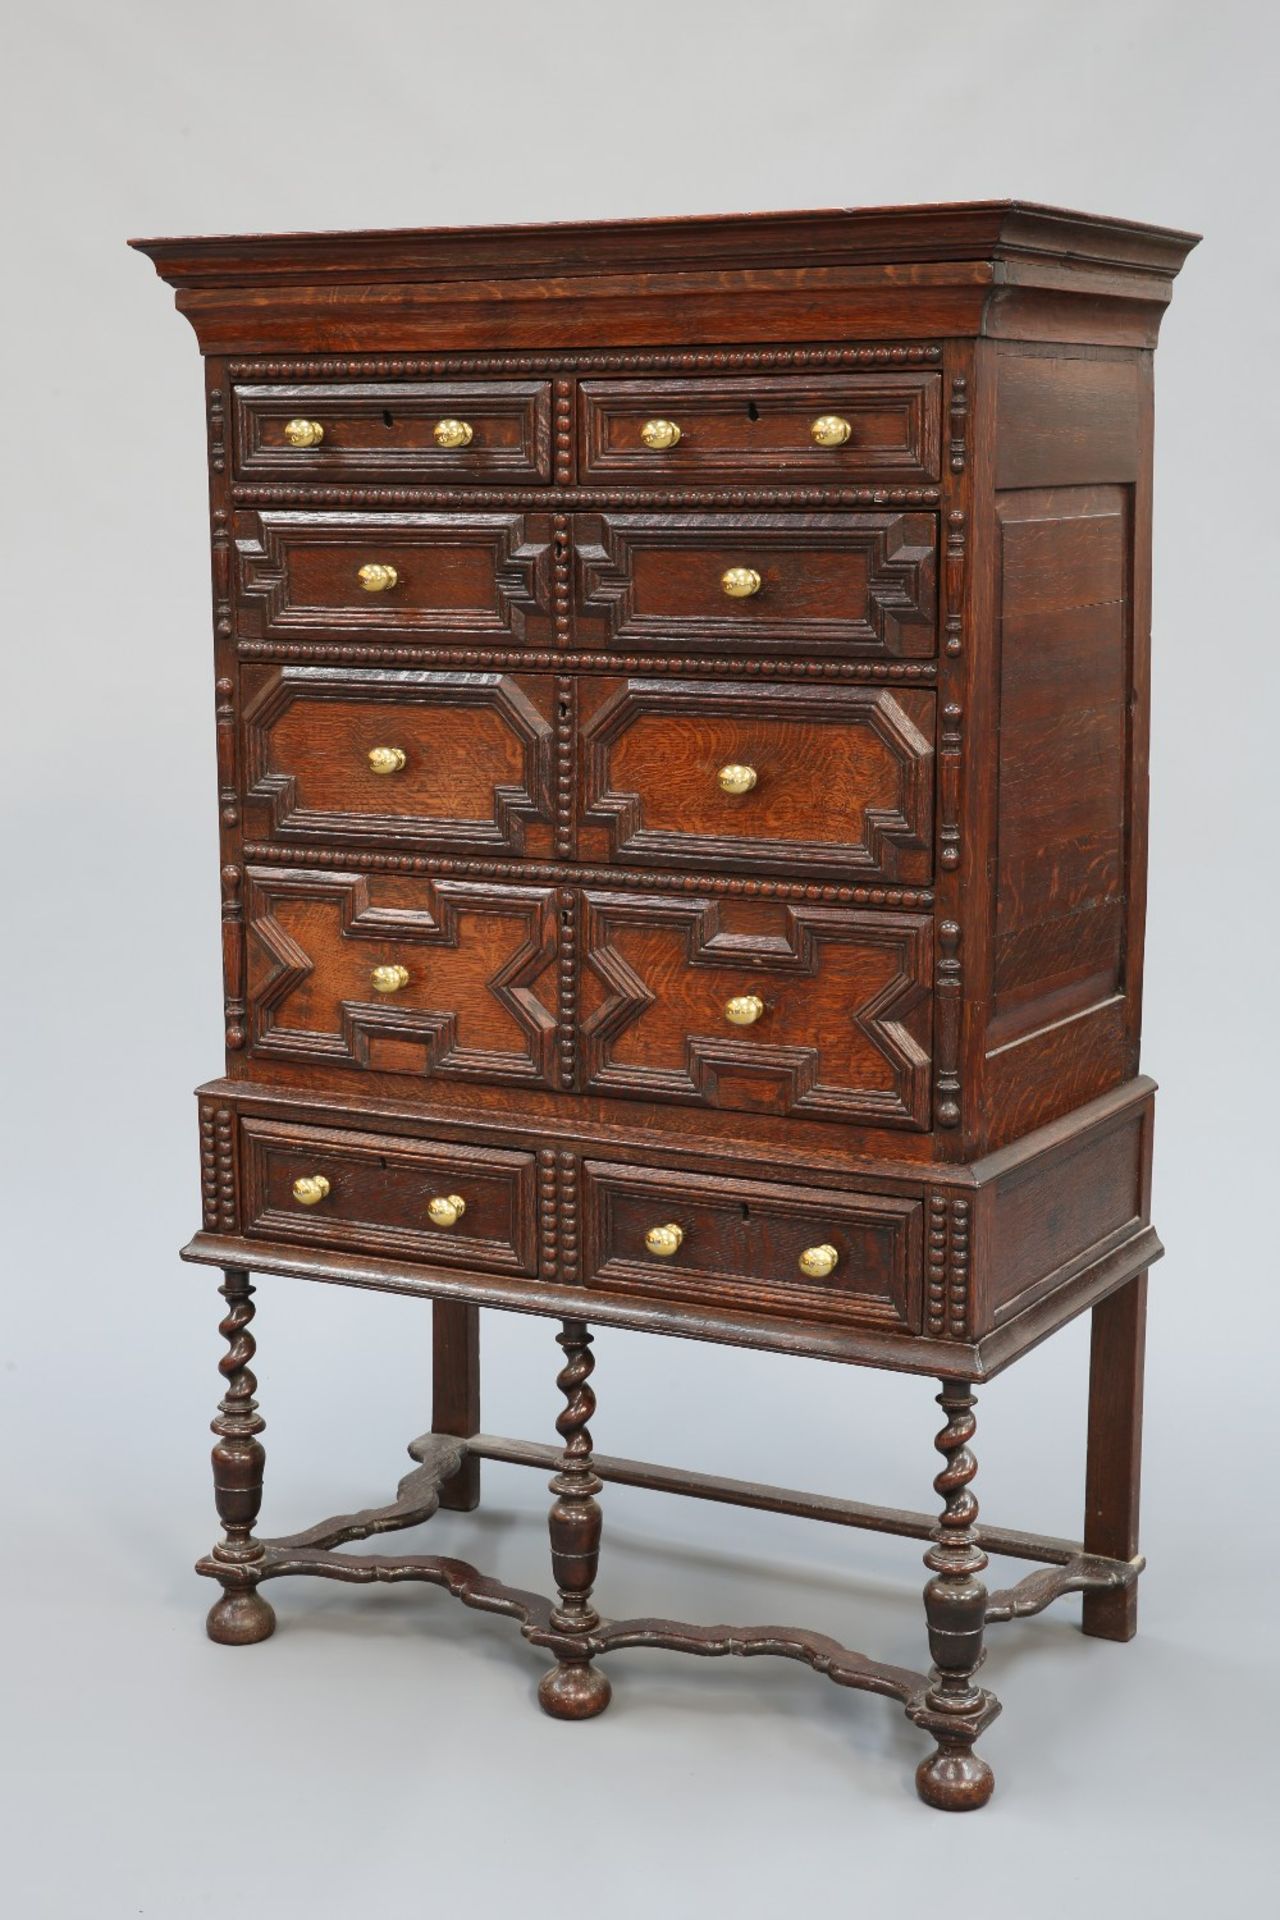 A 17TH CENTURY STYLE OAK CHEST ON STAND, 19TH CENTURY